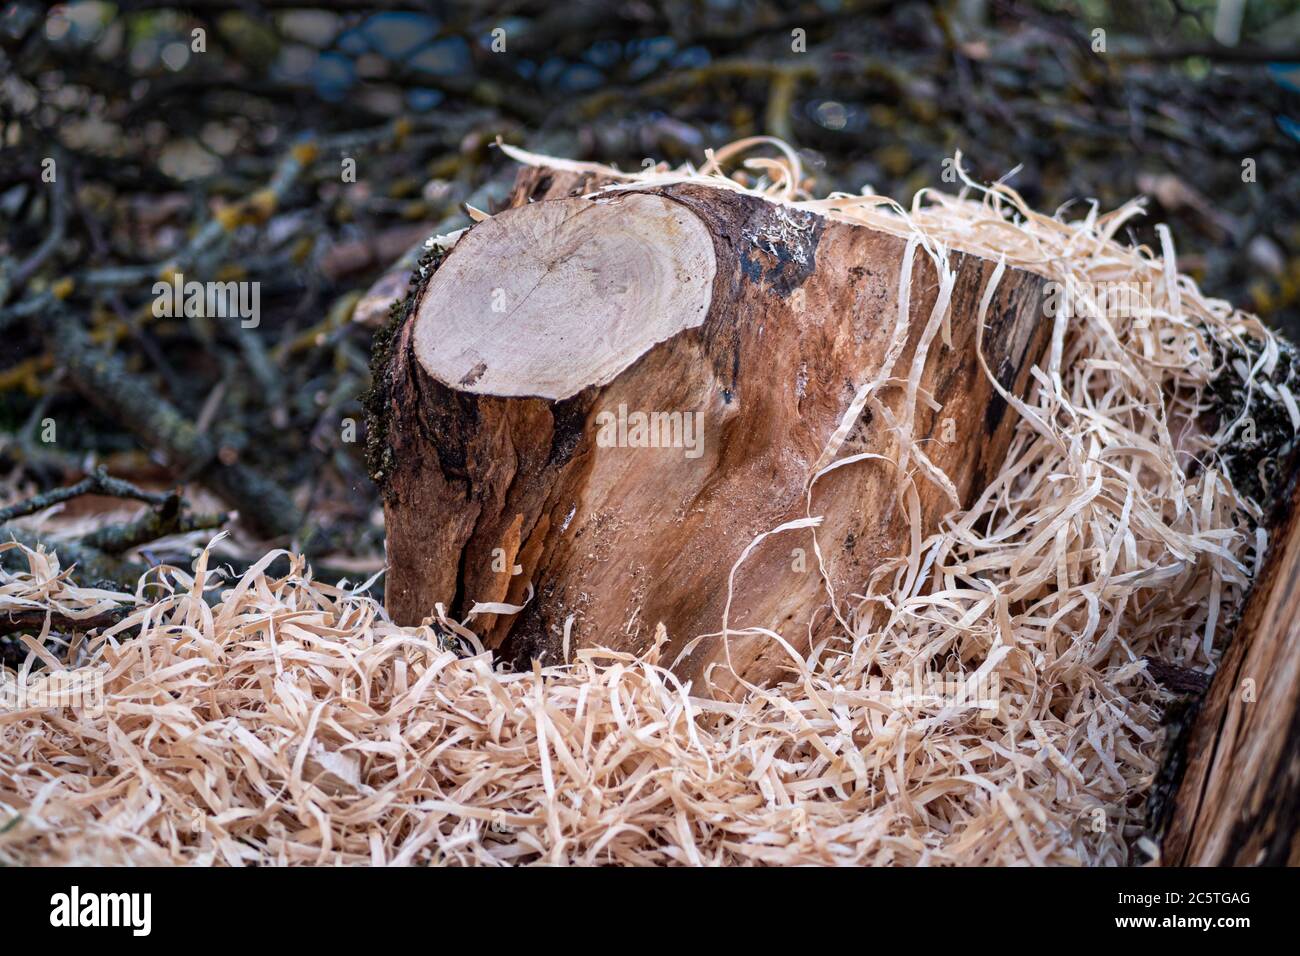 Parts of a sawn tree trunk, unsorted with a lot of sawdust. Stock Photo